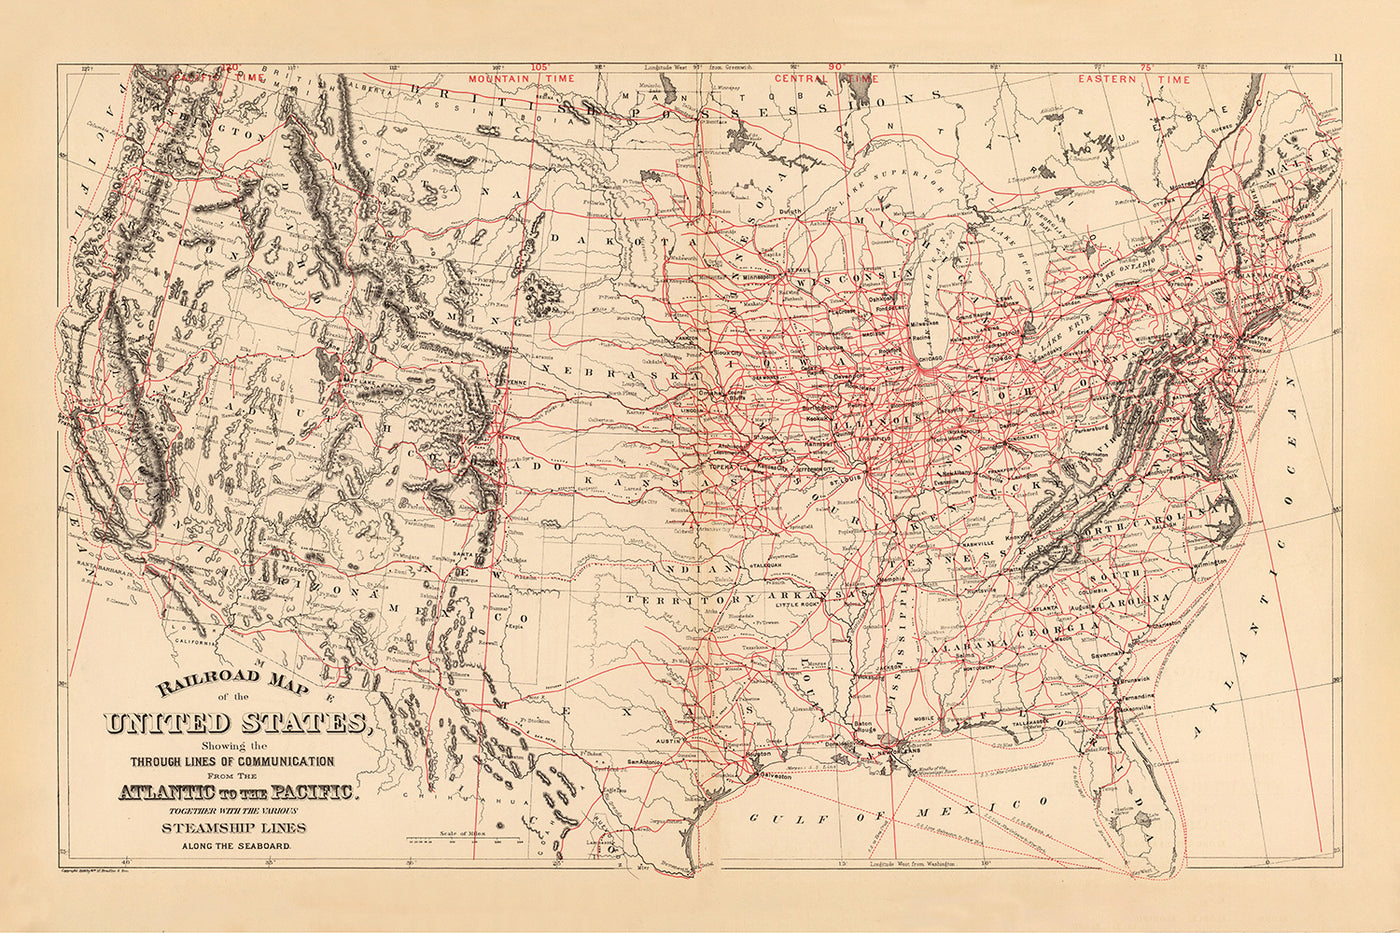 Old Railroad Map of the United States by Samuel Mitchell, 1890: Atlantic to Pacific Railway Chart